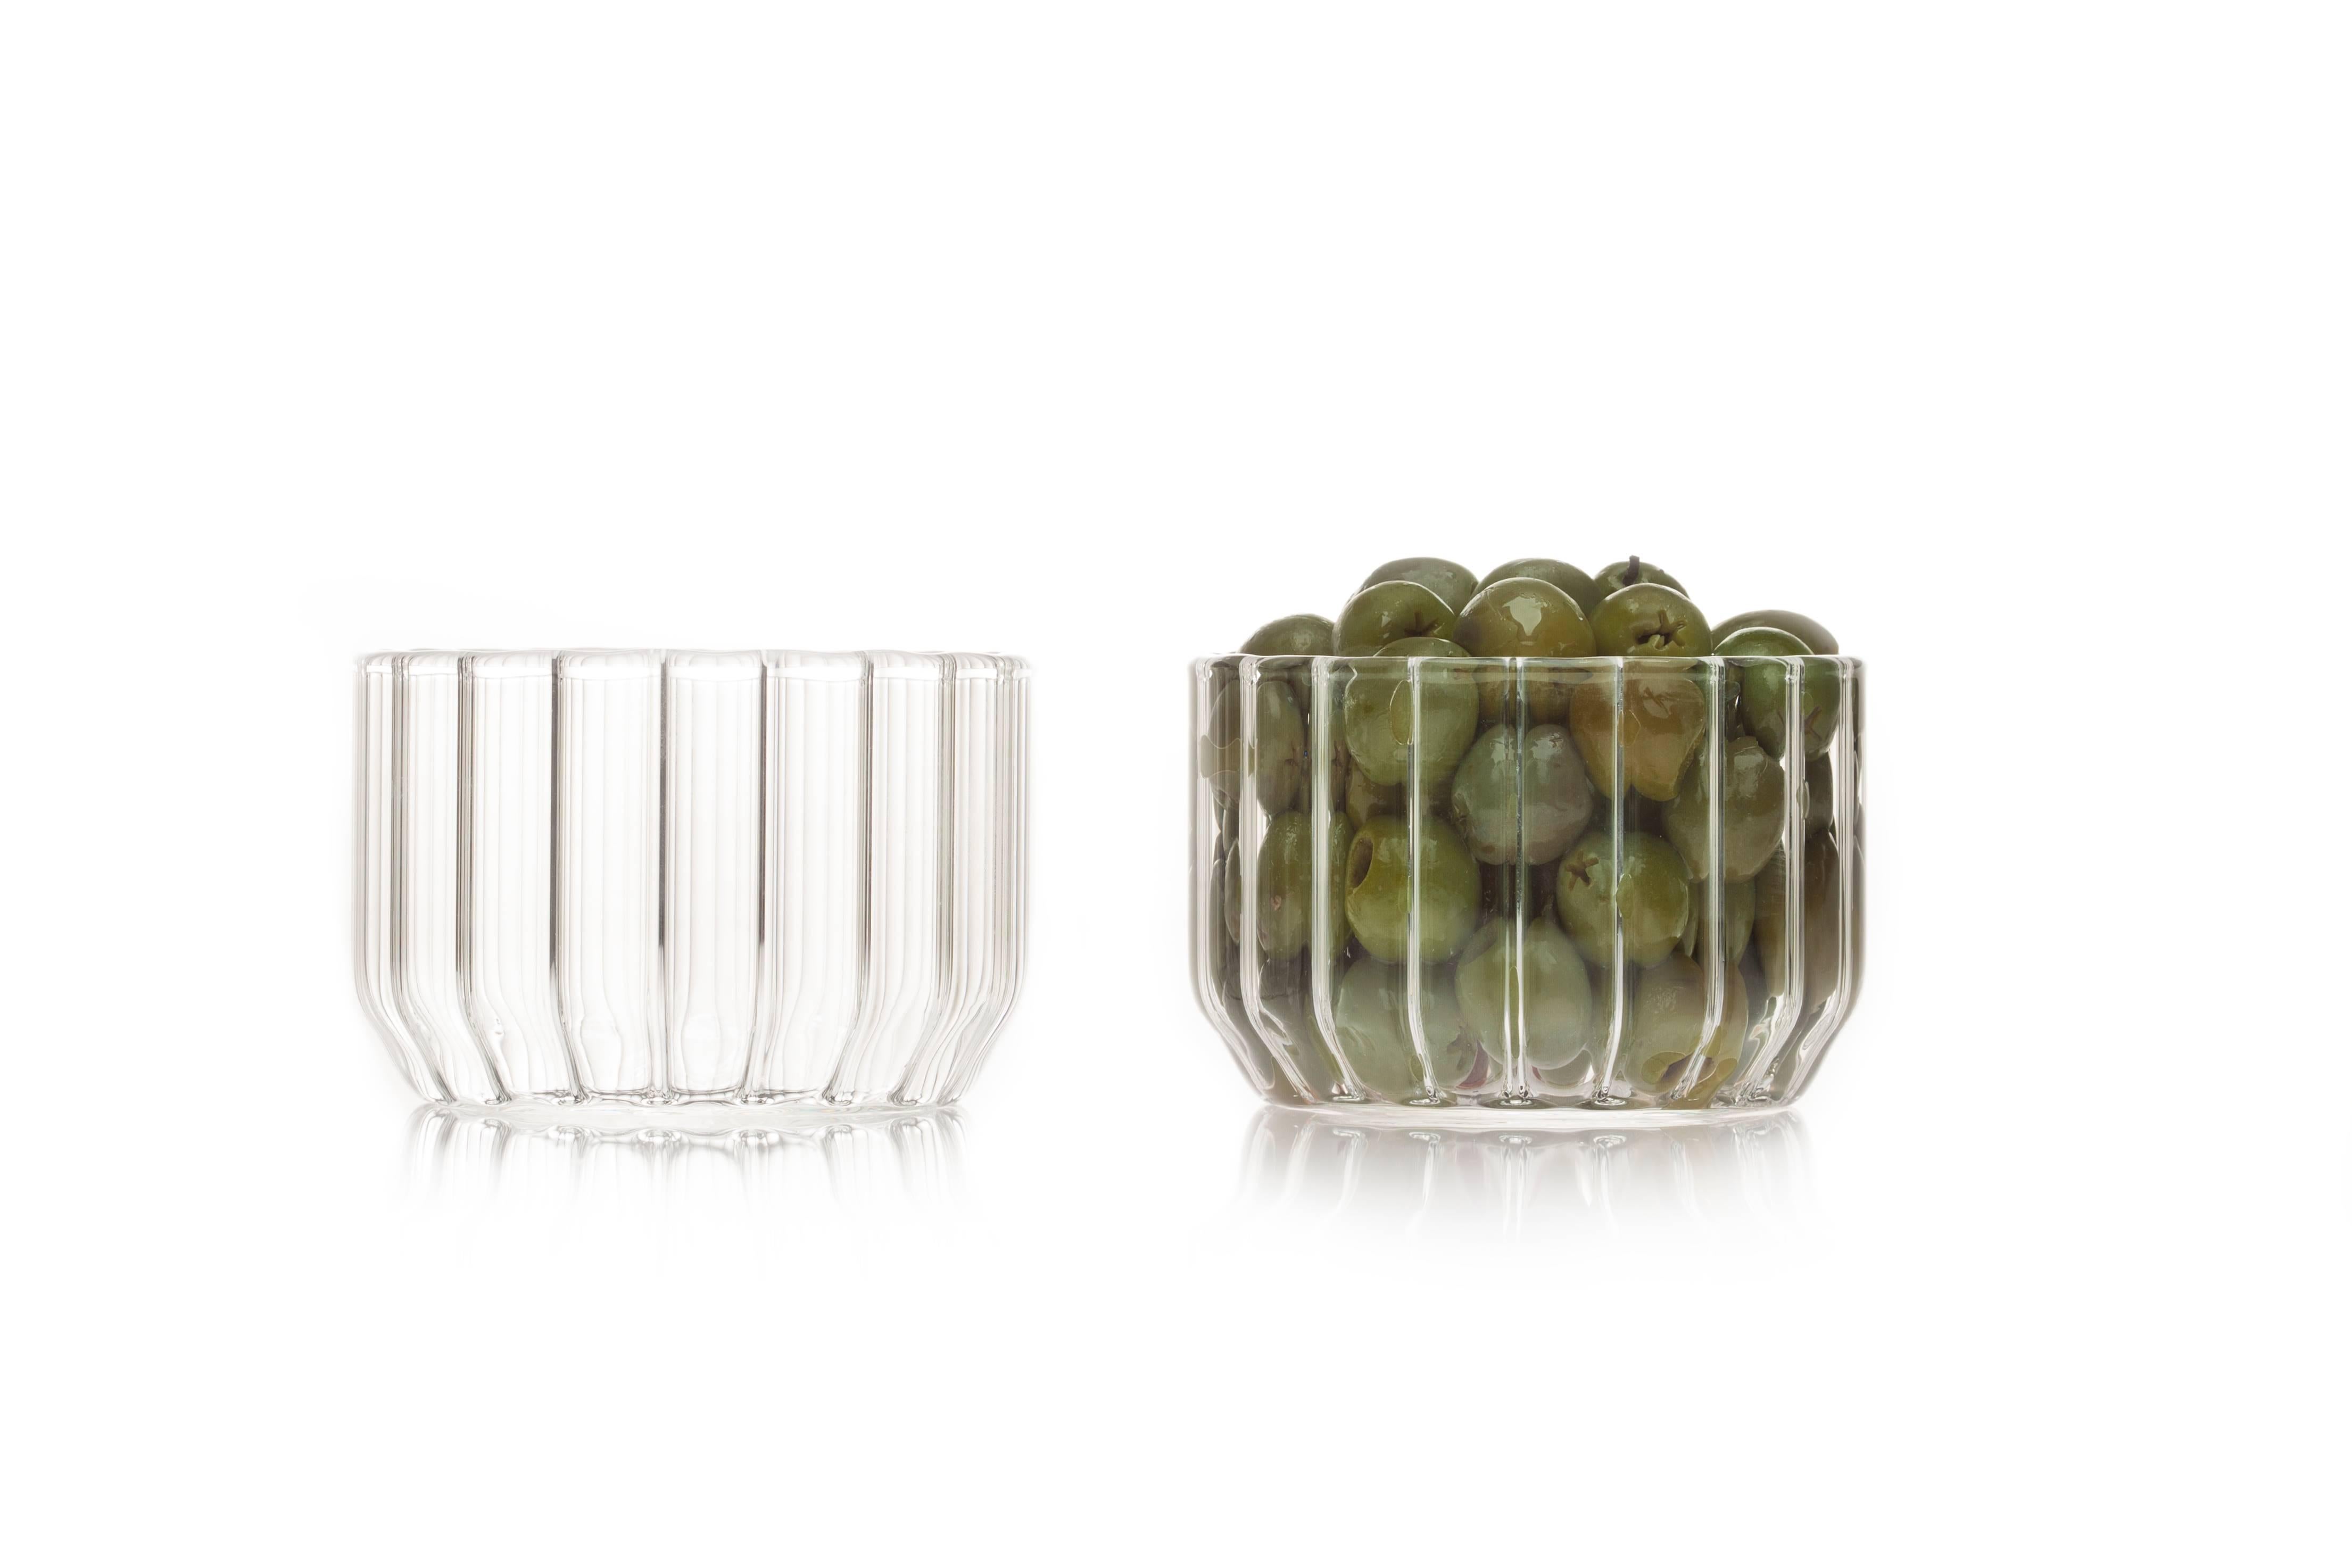 Dearborn large glass bowl

The handmade Czech contemporary large glass bowl is perfect for snacks during cocktail hour, candies, catchall, or even in the bathroom as a vessel for jewelry.

Perfect for everyday or formal dining settings, modern